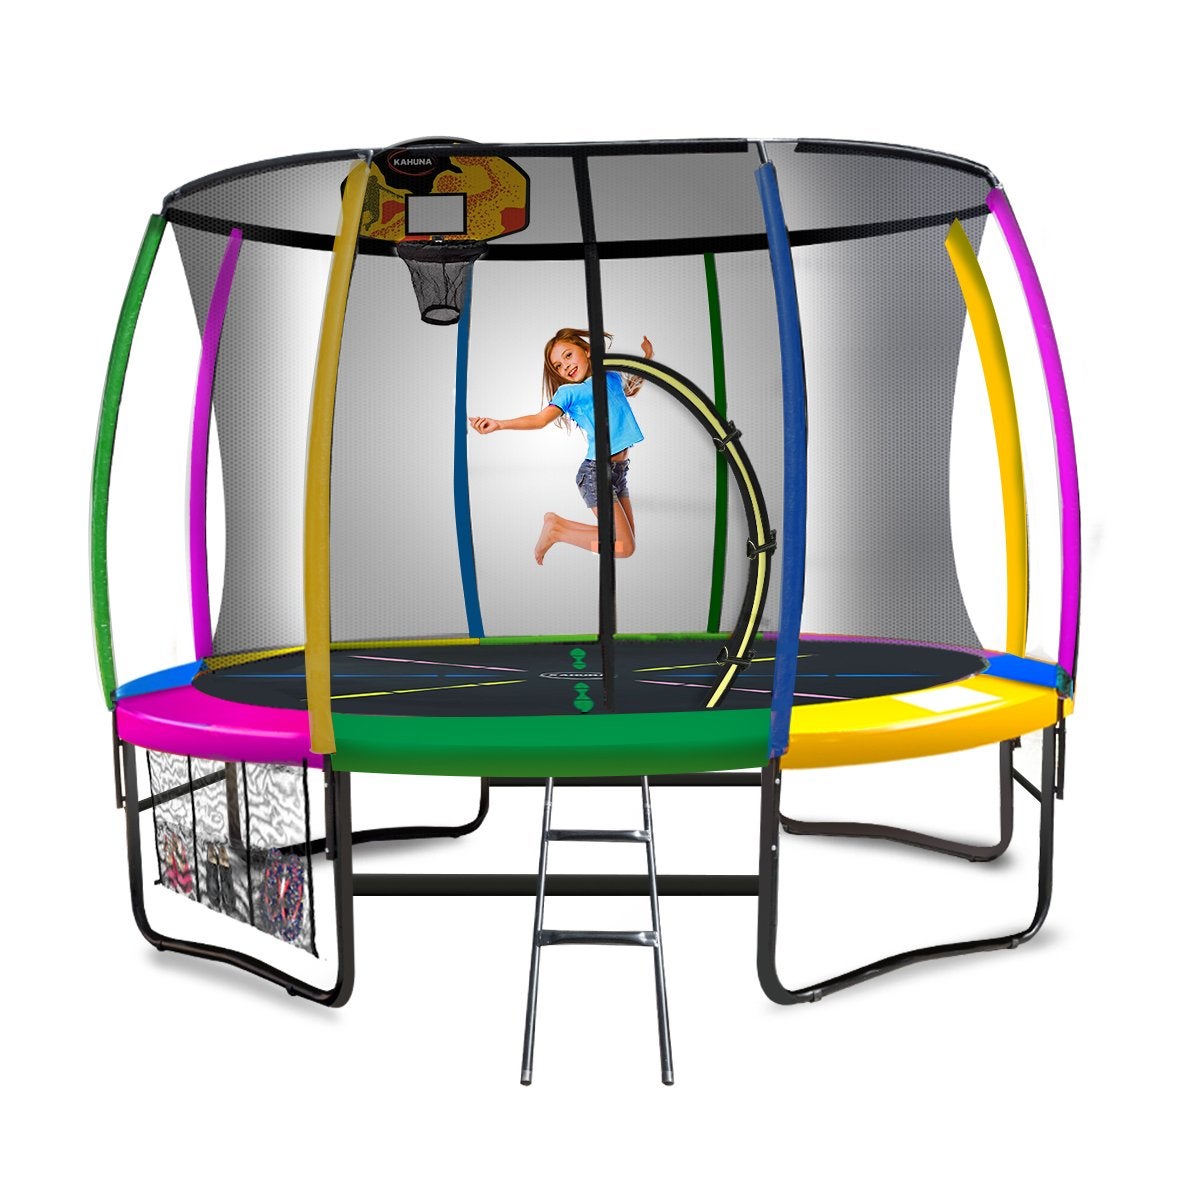 Kahuna 10ft Round Trampoline Safety Net Spring Pad Cover Mat Free Ladder Basketball Set